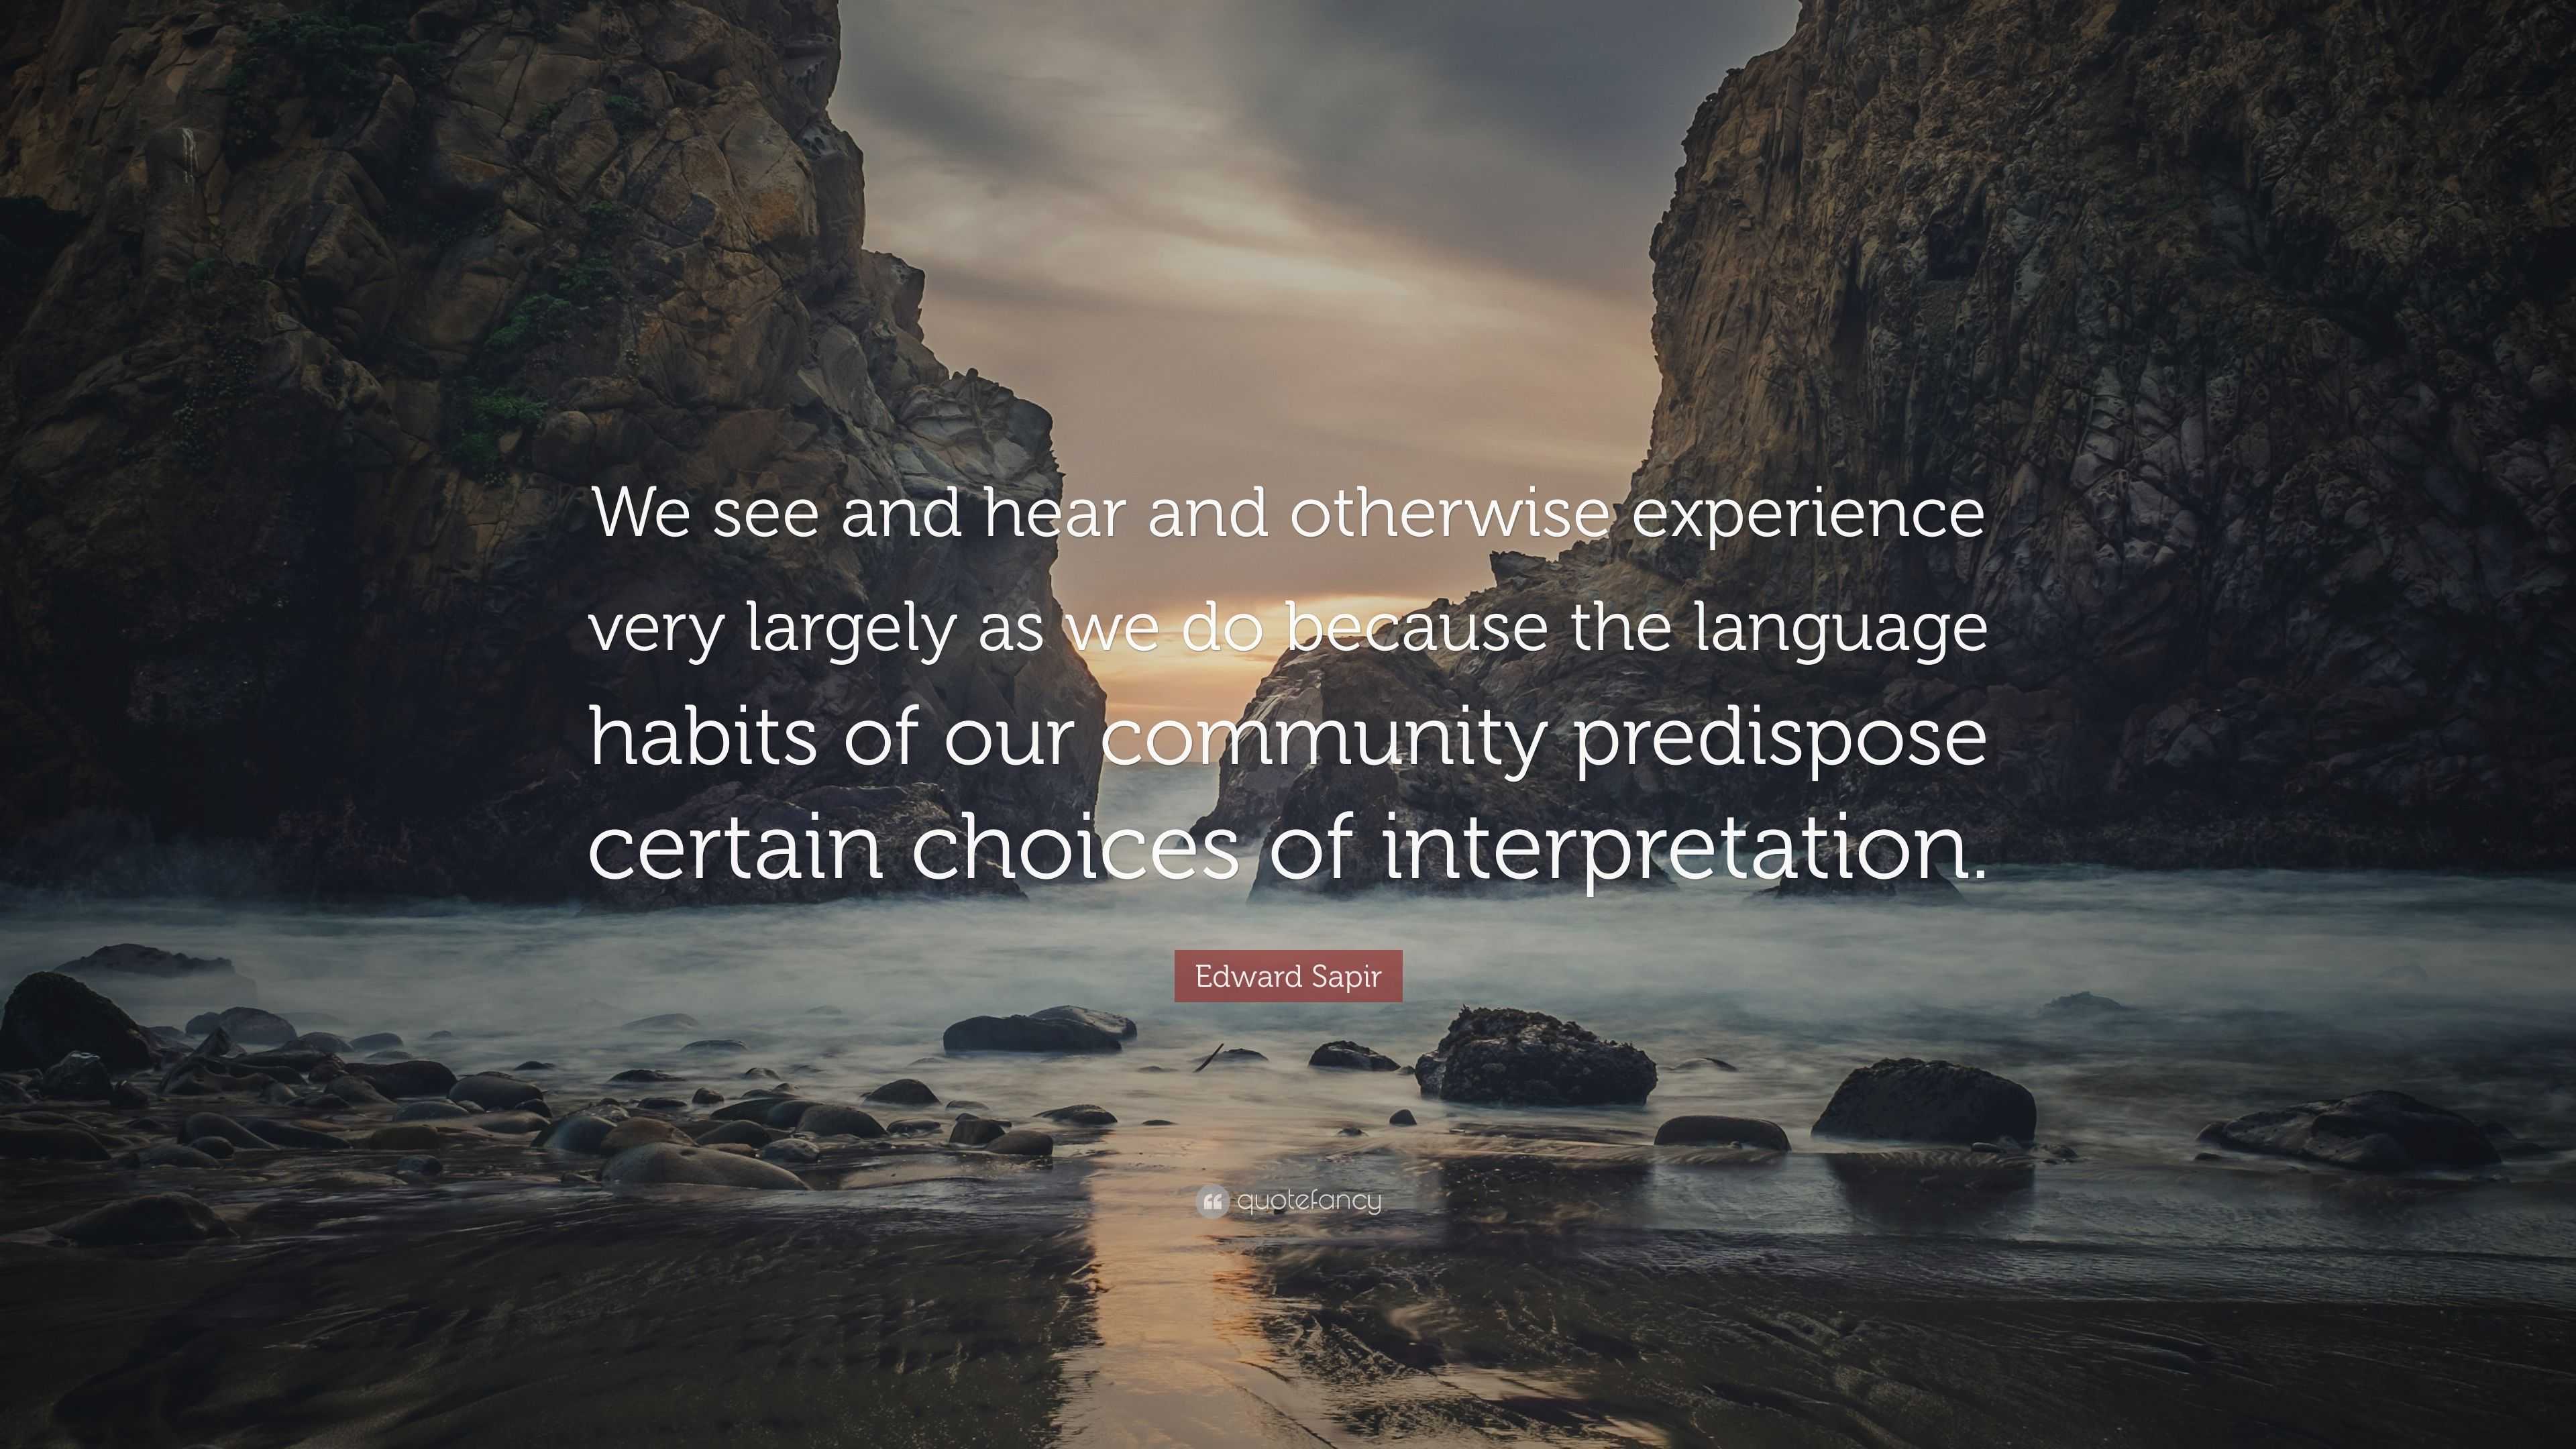 “We see and hear and otherwise experience very largely as we do because the language habits of our community predispose certain choices of interpretation.”